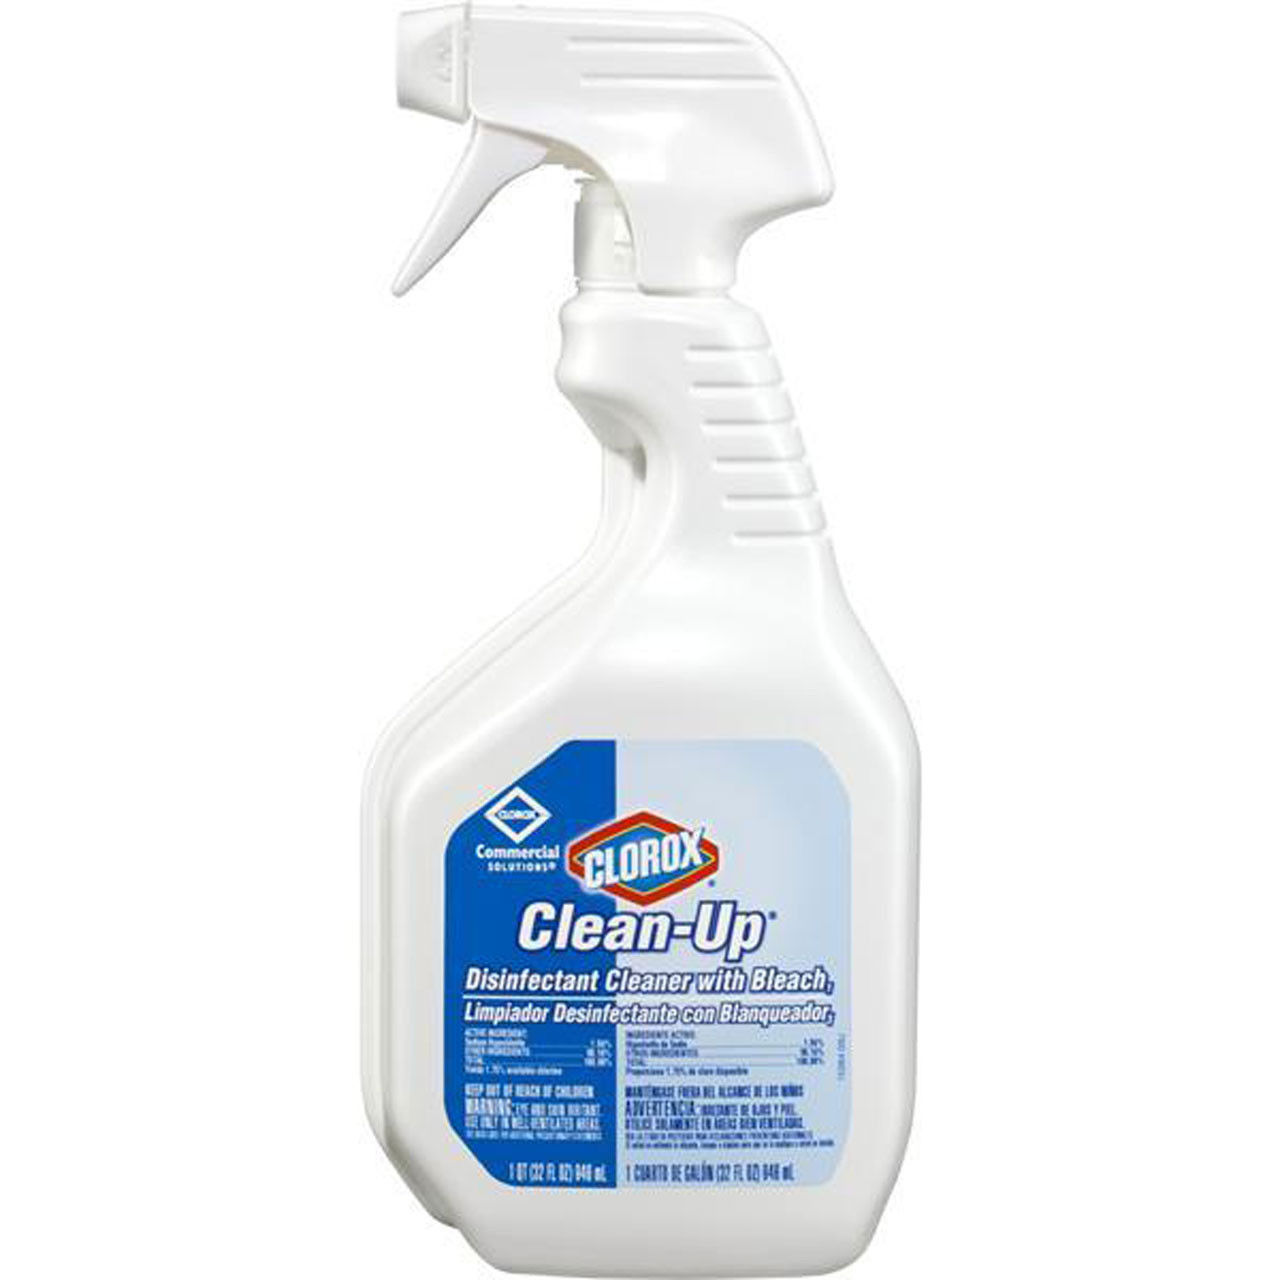 What does Clorox Clean-Up eliminate in terms of cleaning?